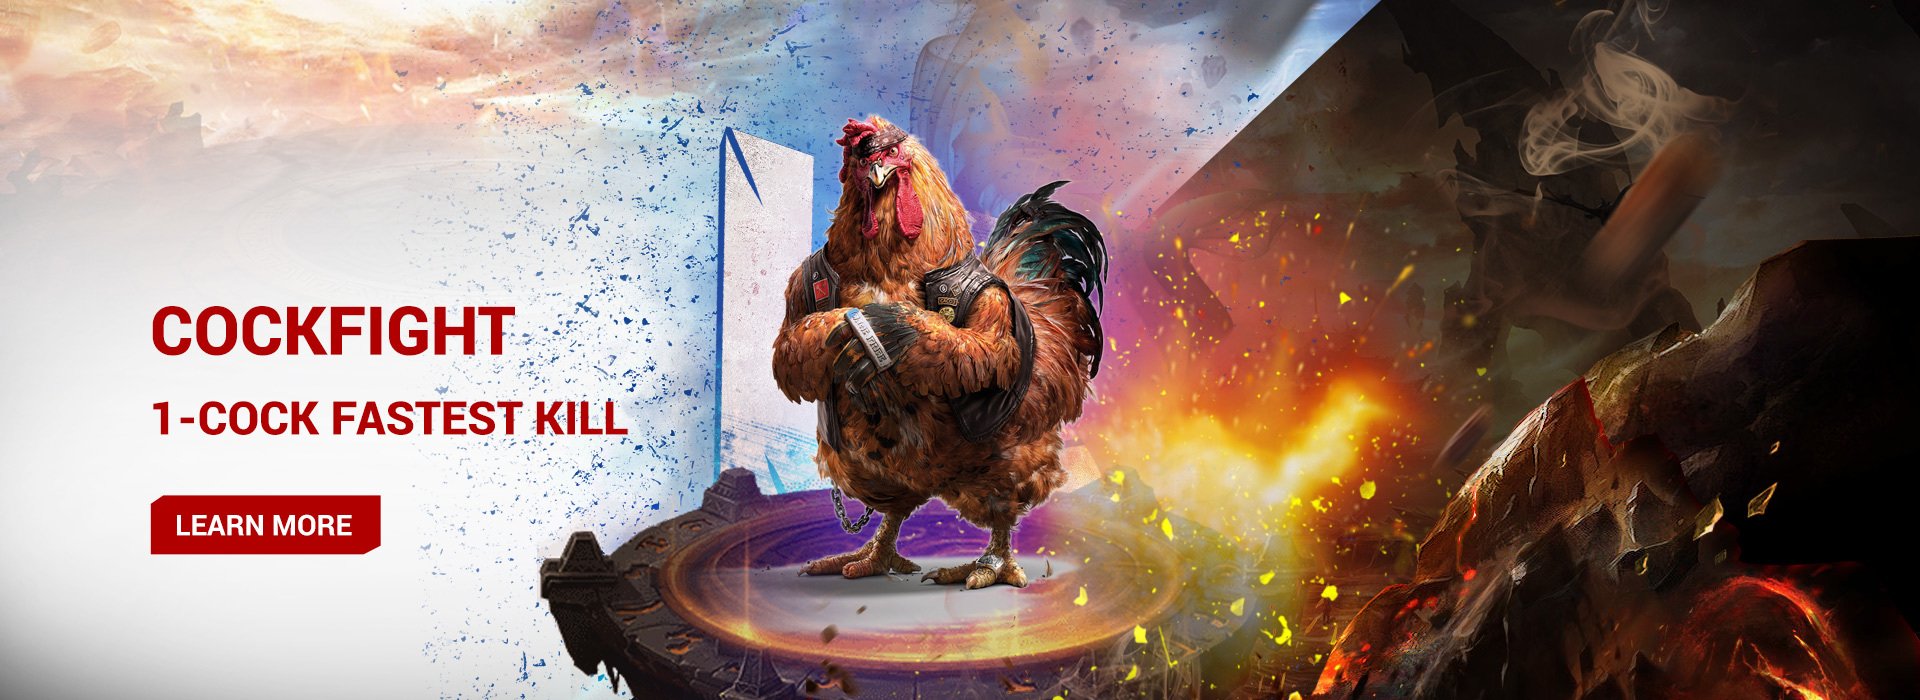 PLAY COCKFIGHT AND SLOT GAMES WITH ONLINE CASINO SINGAPORE